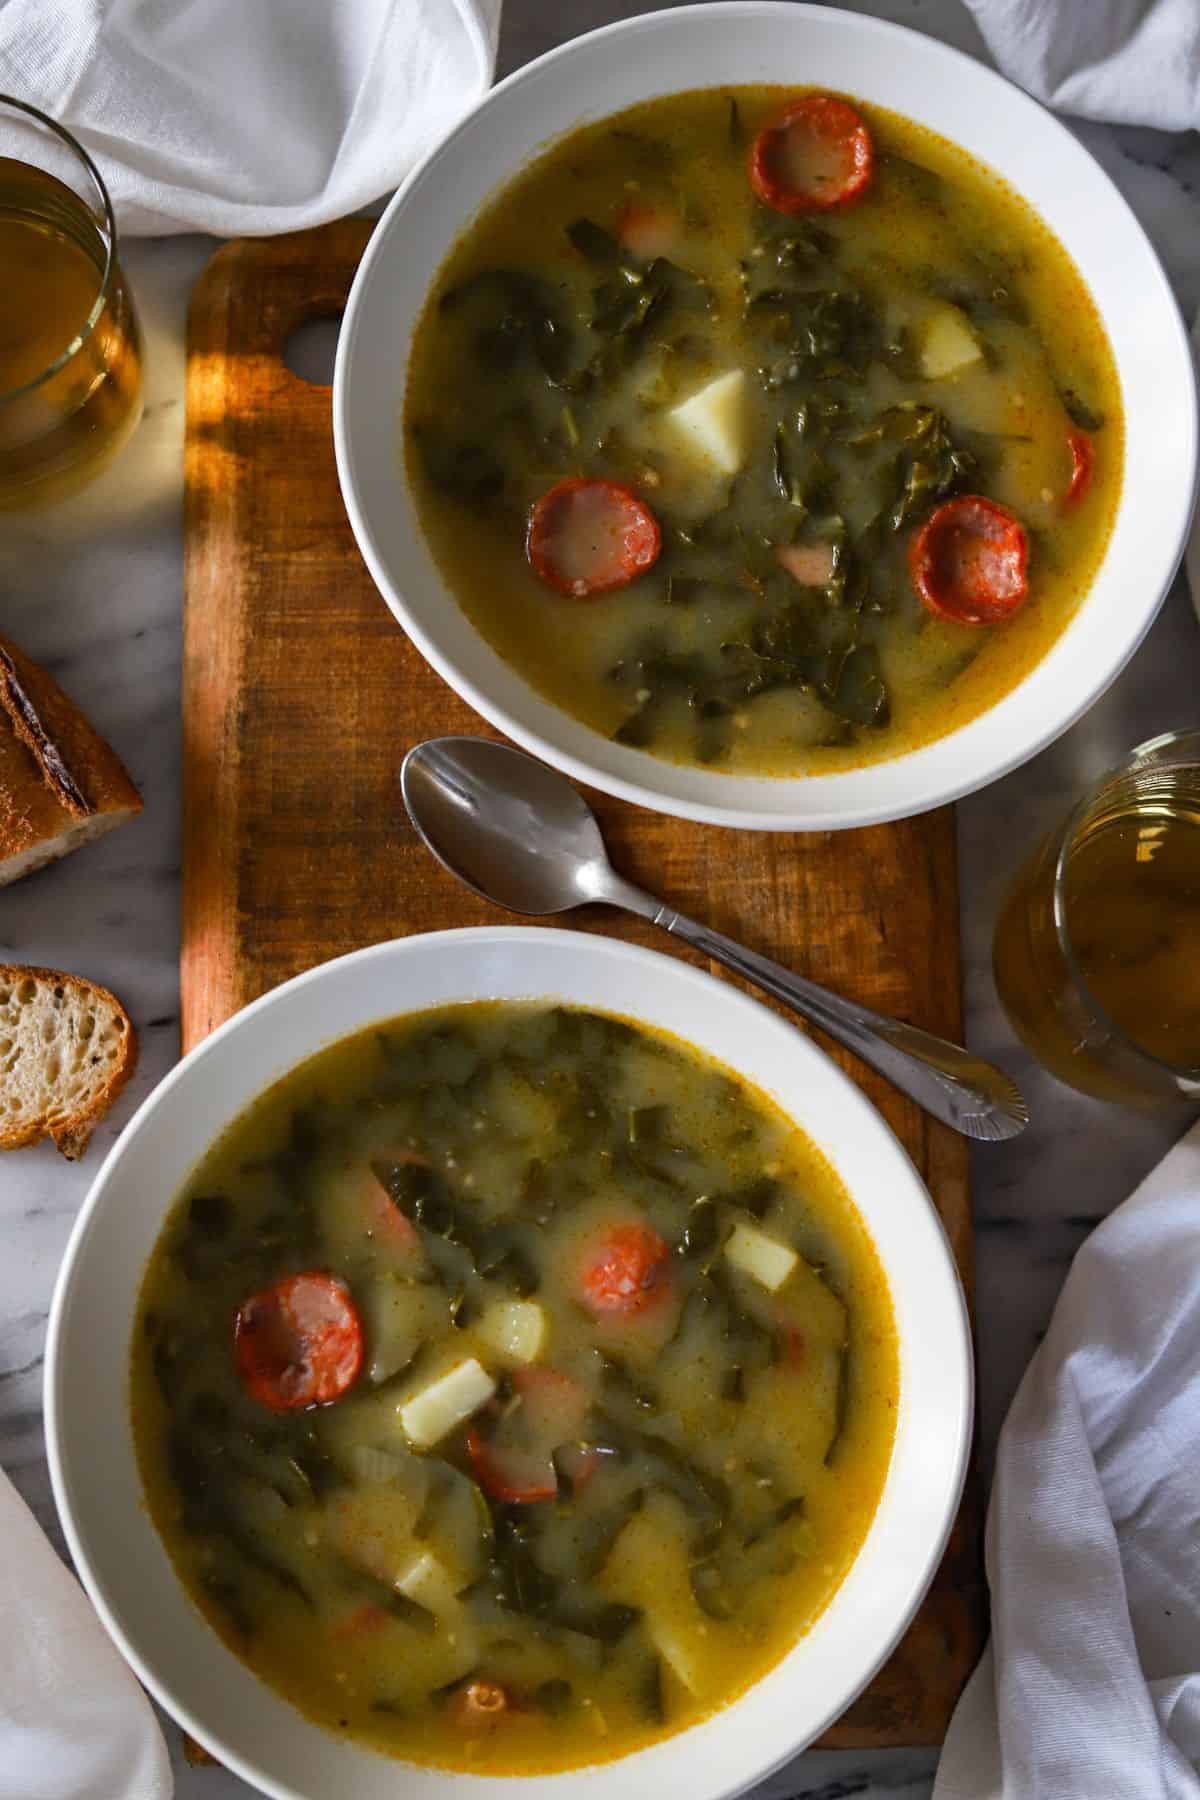 two bowls of caldo verde shown with sliced bread and two glasses of wine.